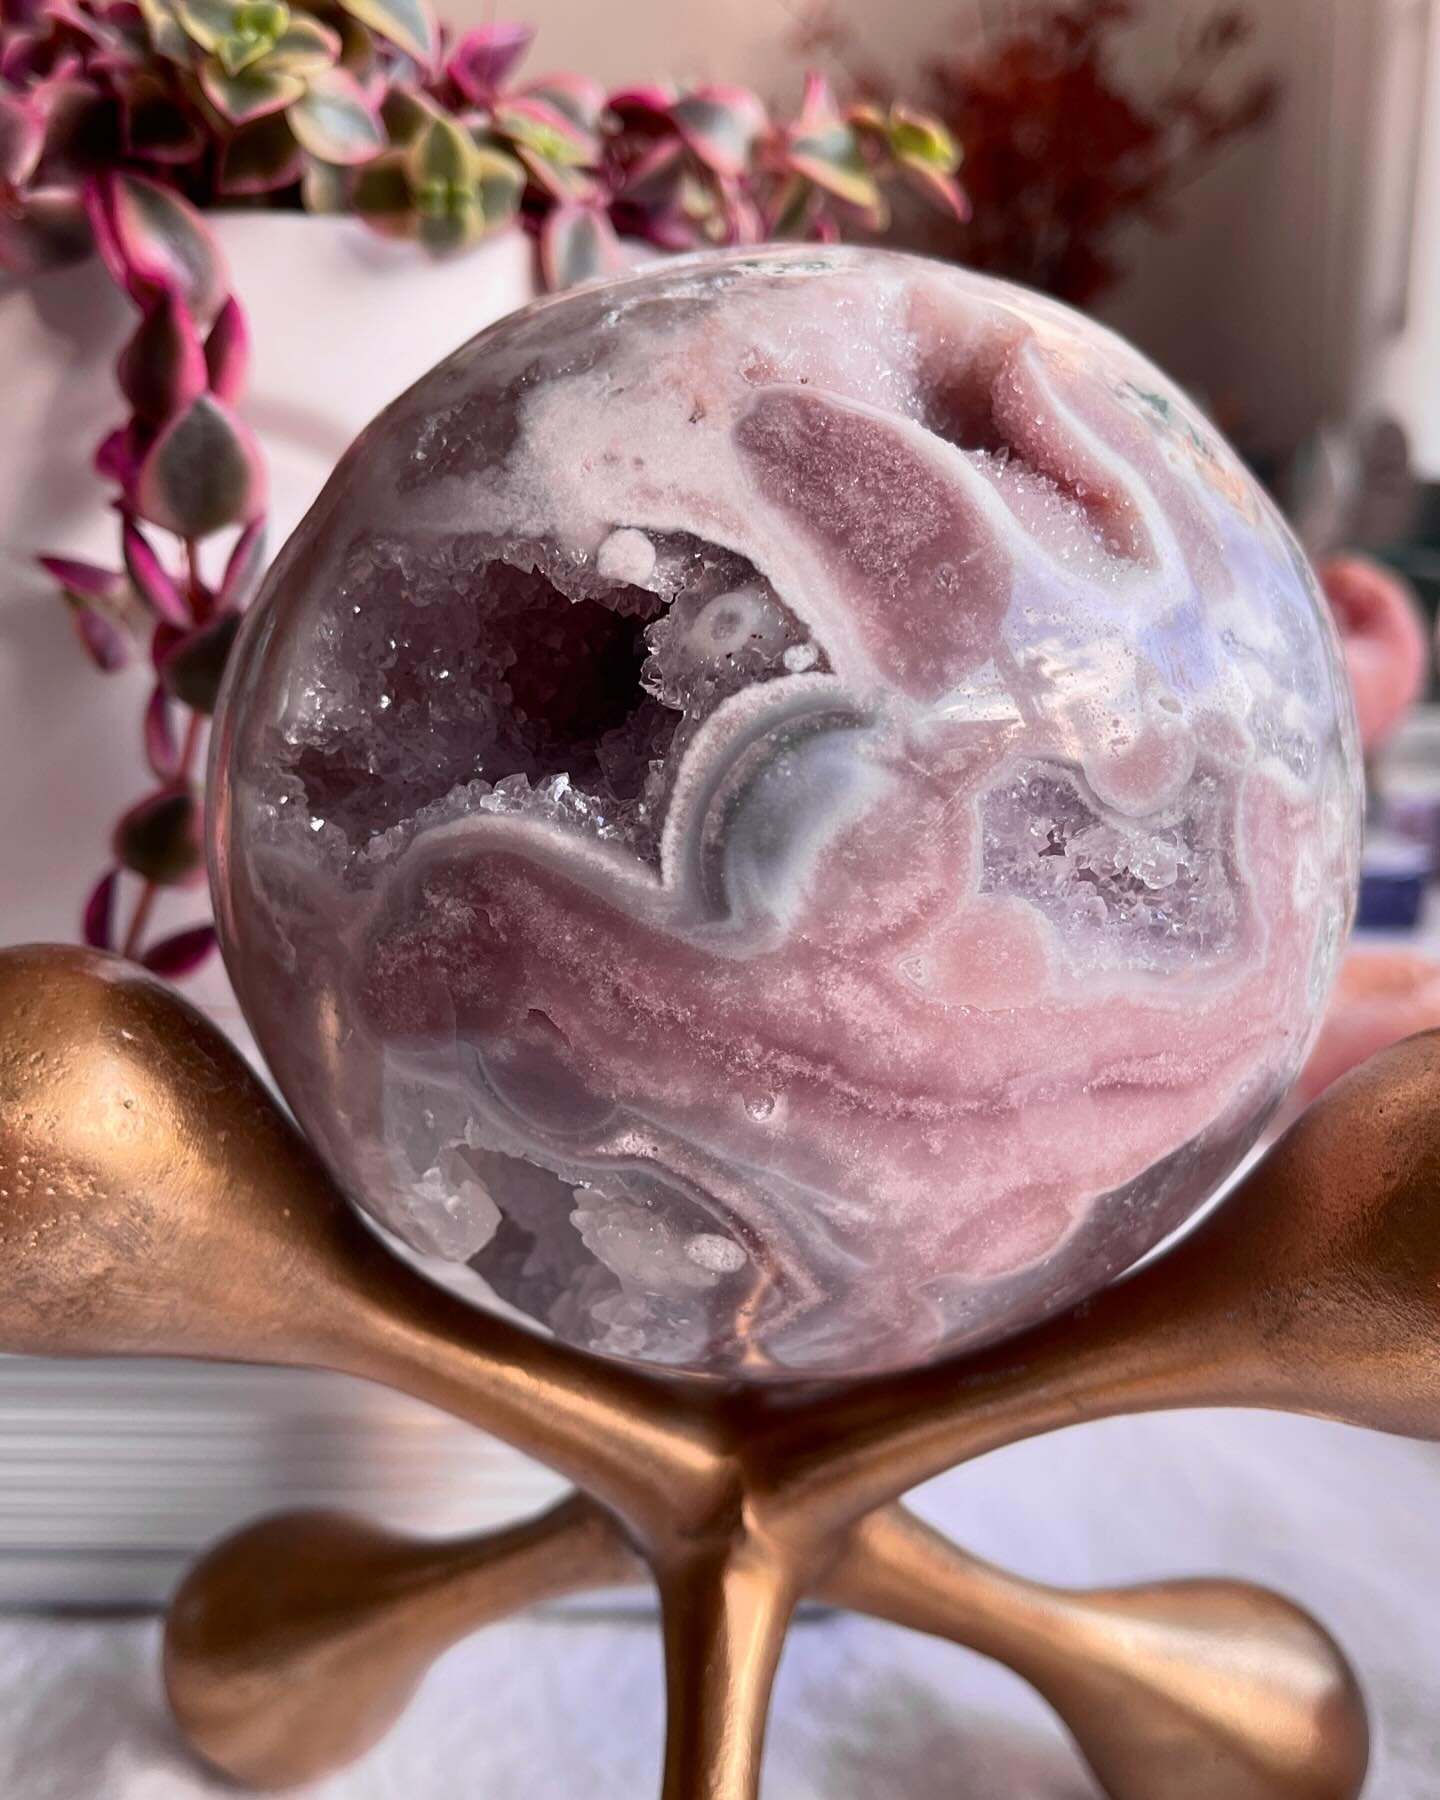 Isn&rsquo;t she lovely? 🌸

This lady has a lot to say, she holds many secrets within every angle of her beauty. She&rsquo;s a stunning Pink Amethyst Agate, a very special collector&rsquo;s piece.

Did I mention she&rsquo;s a big momma? She&rsquo;s 1